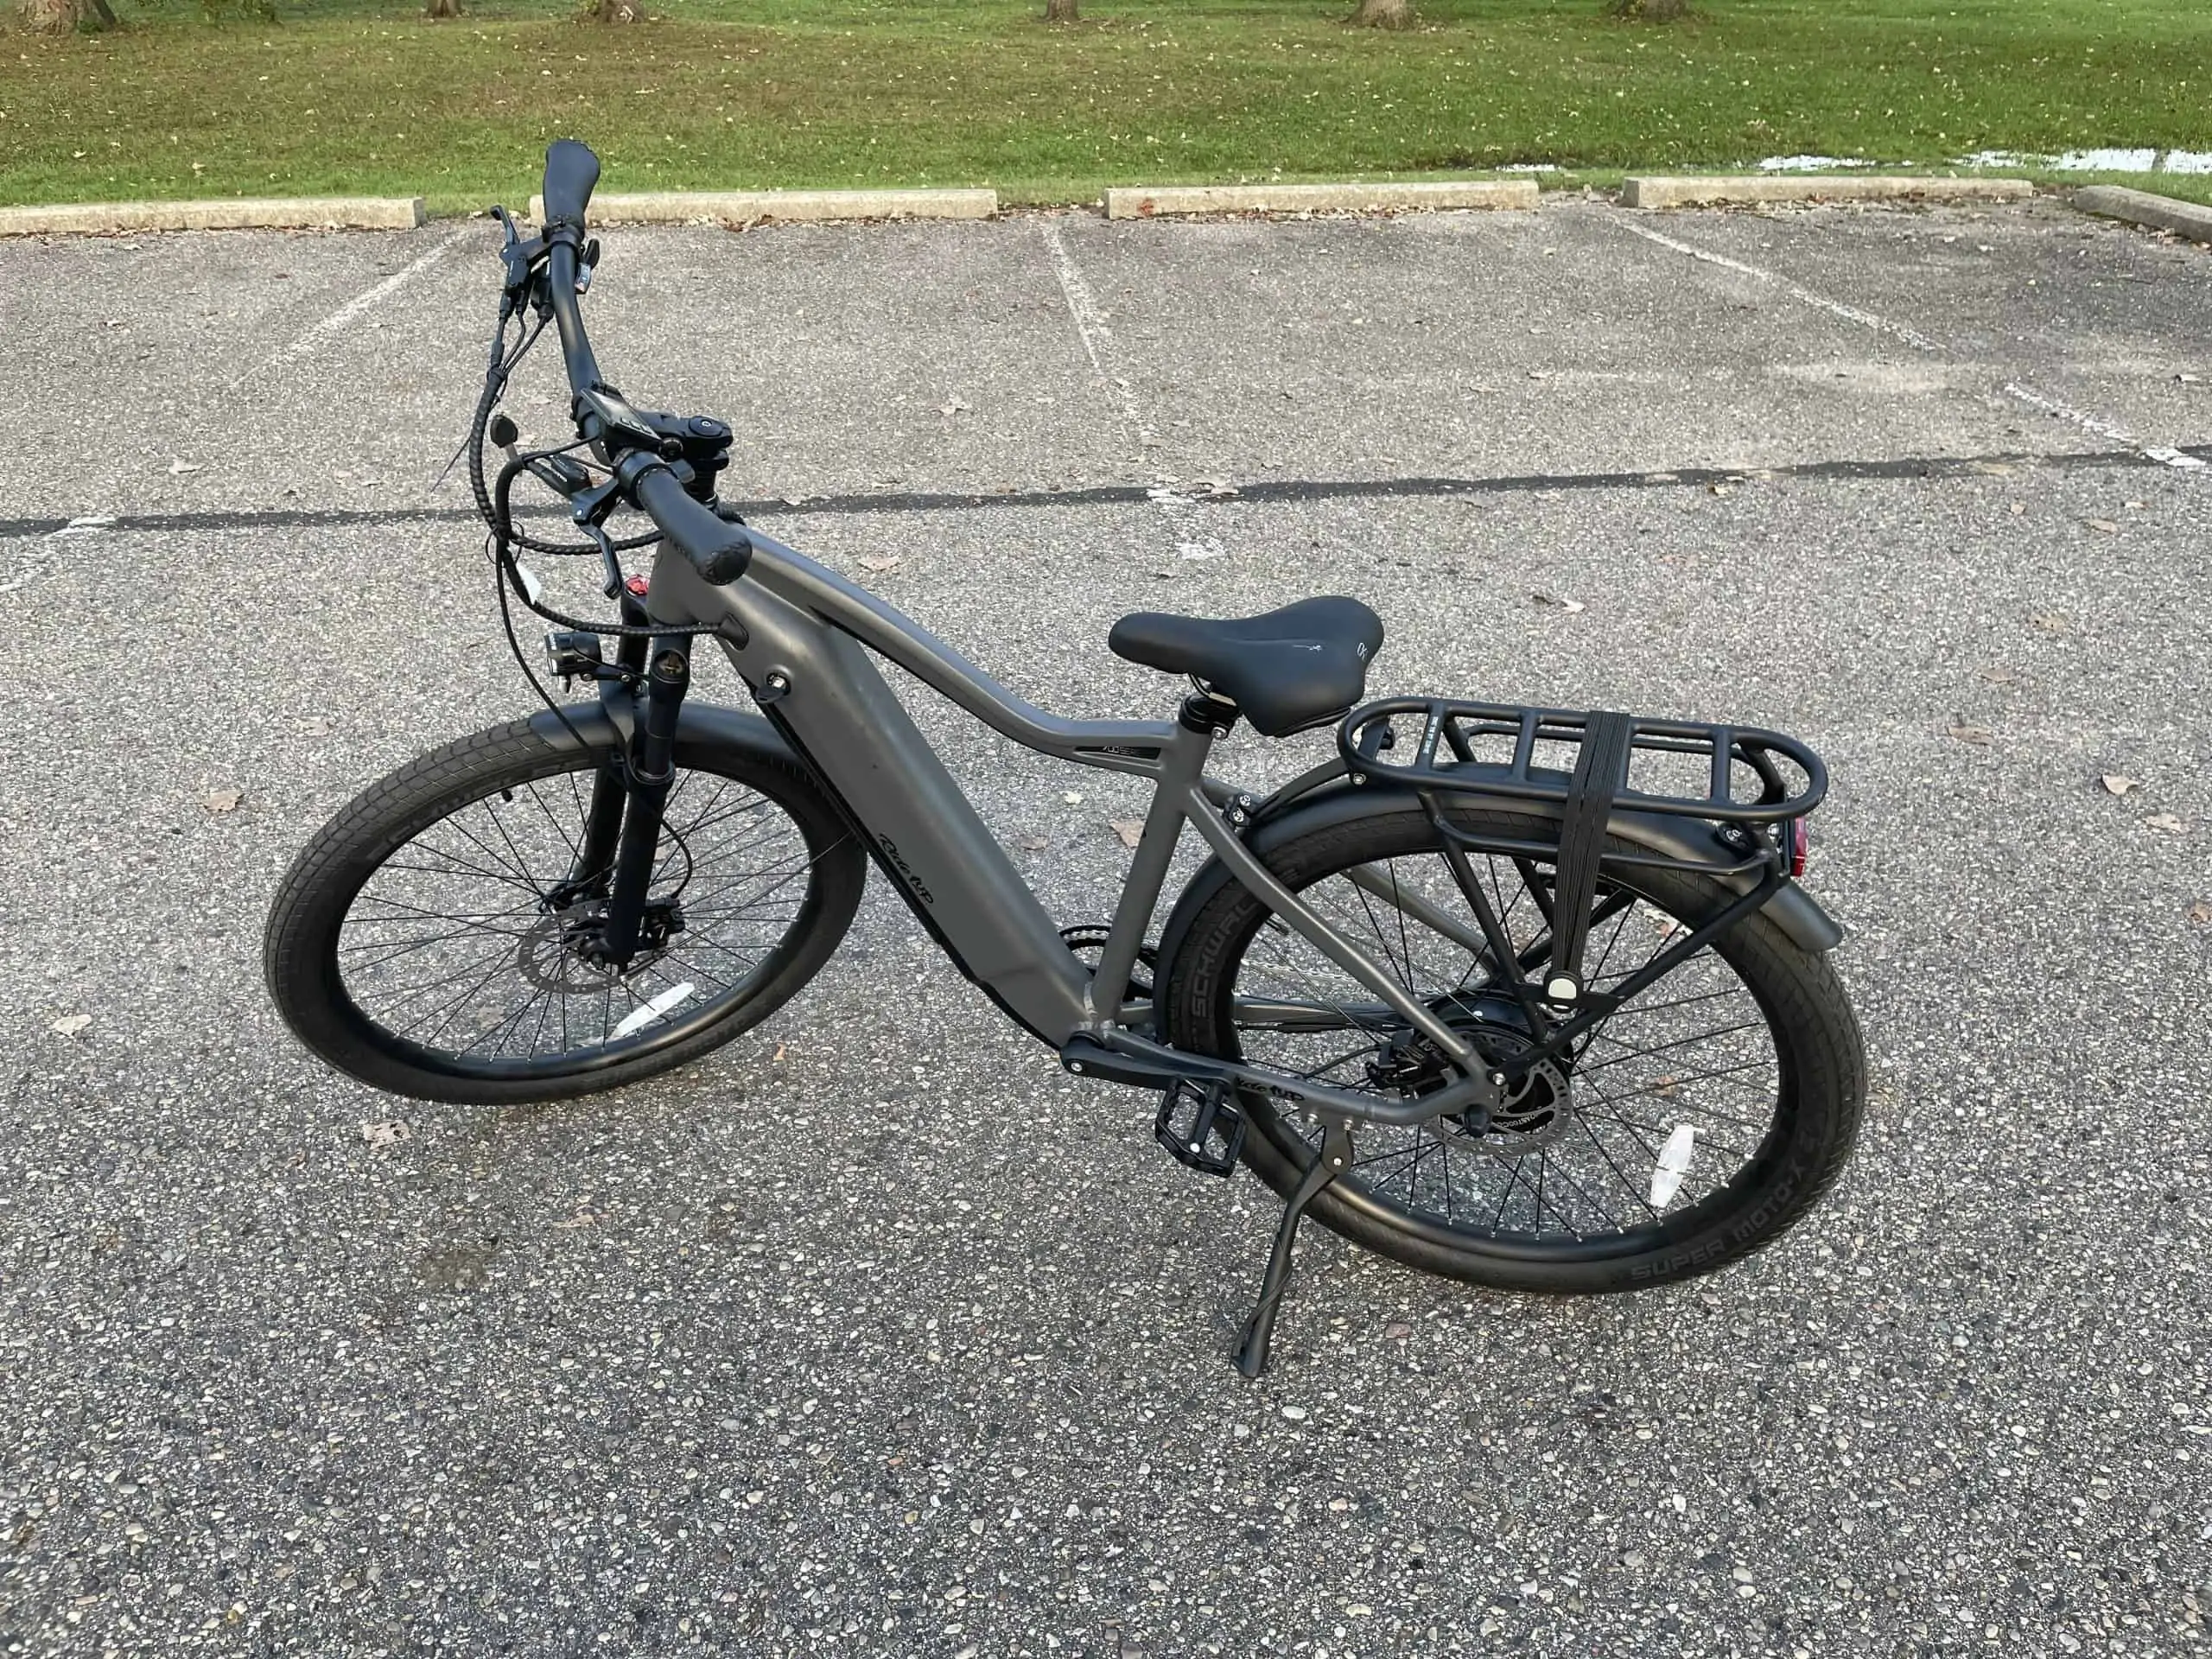 Ride1Up 700 SERIES Ebike Review – Does it Check All The Boxes on Our List?